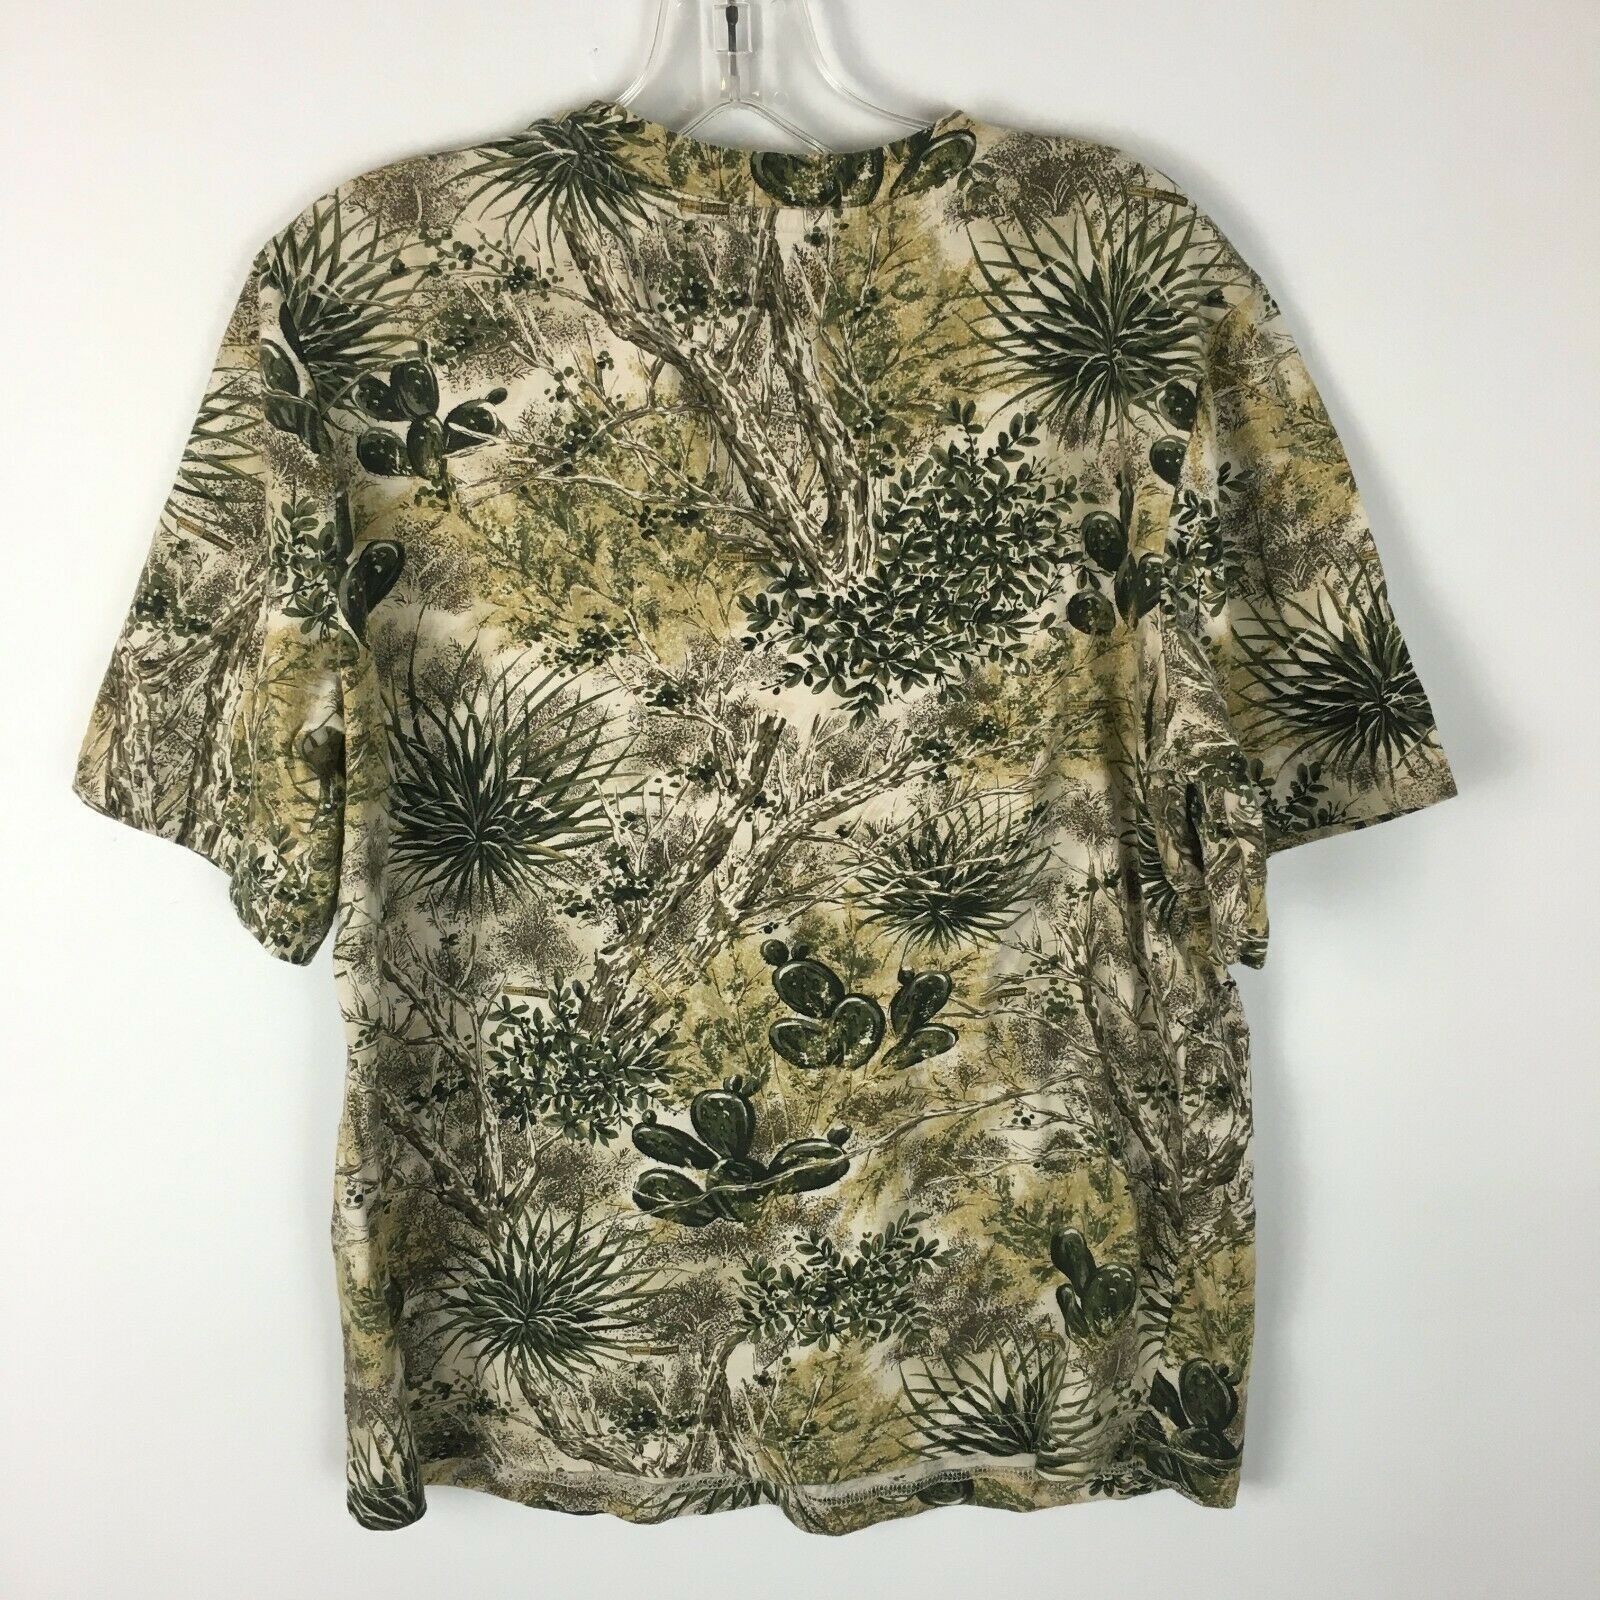 Game Guard Outdoors Men's Short Sleeve Cactus Camouflage Tee Shirt Size ...